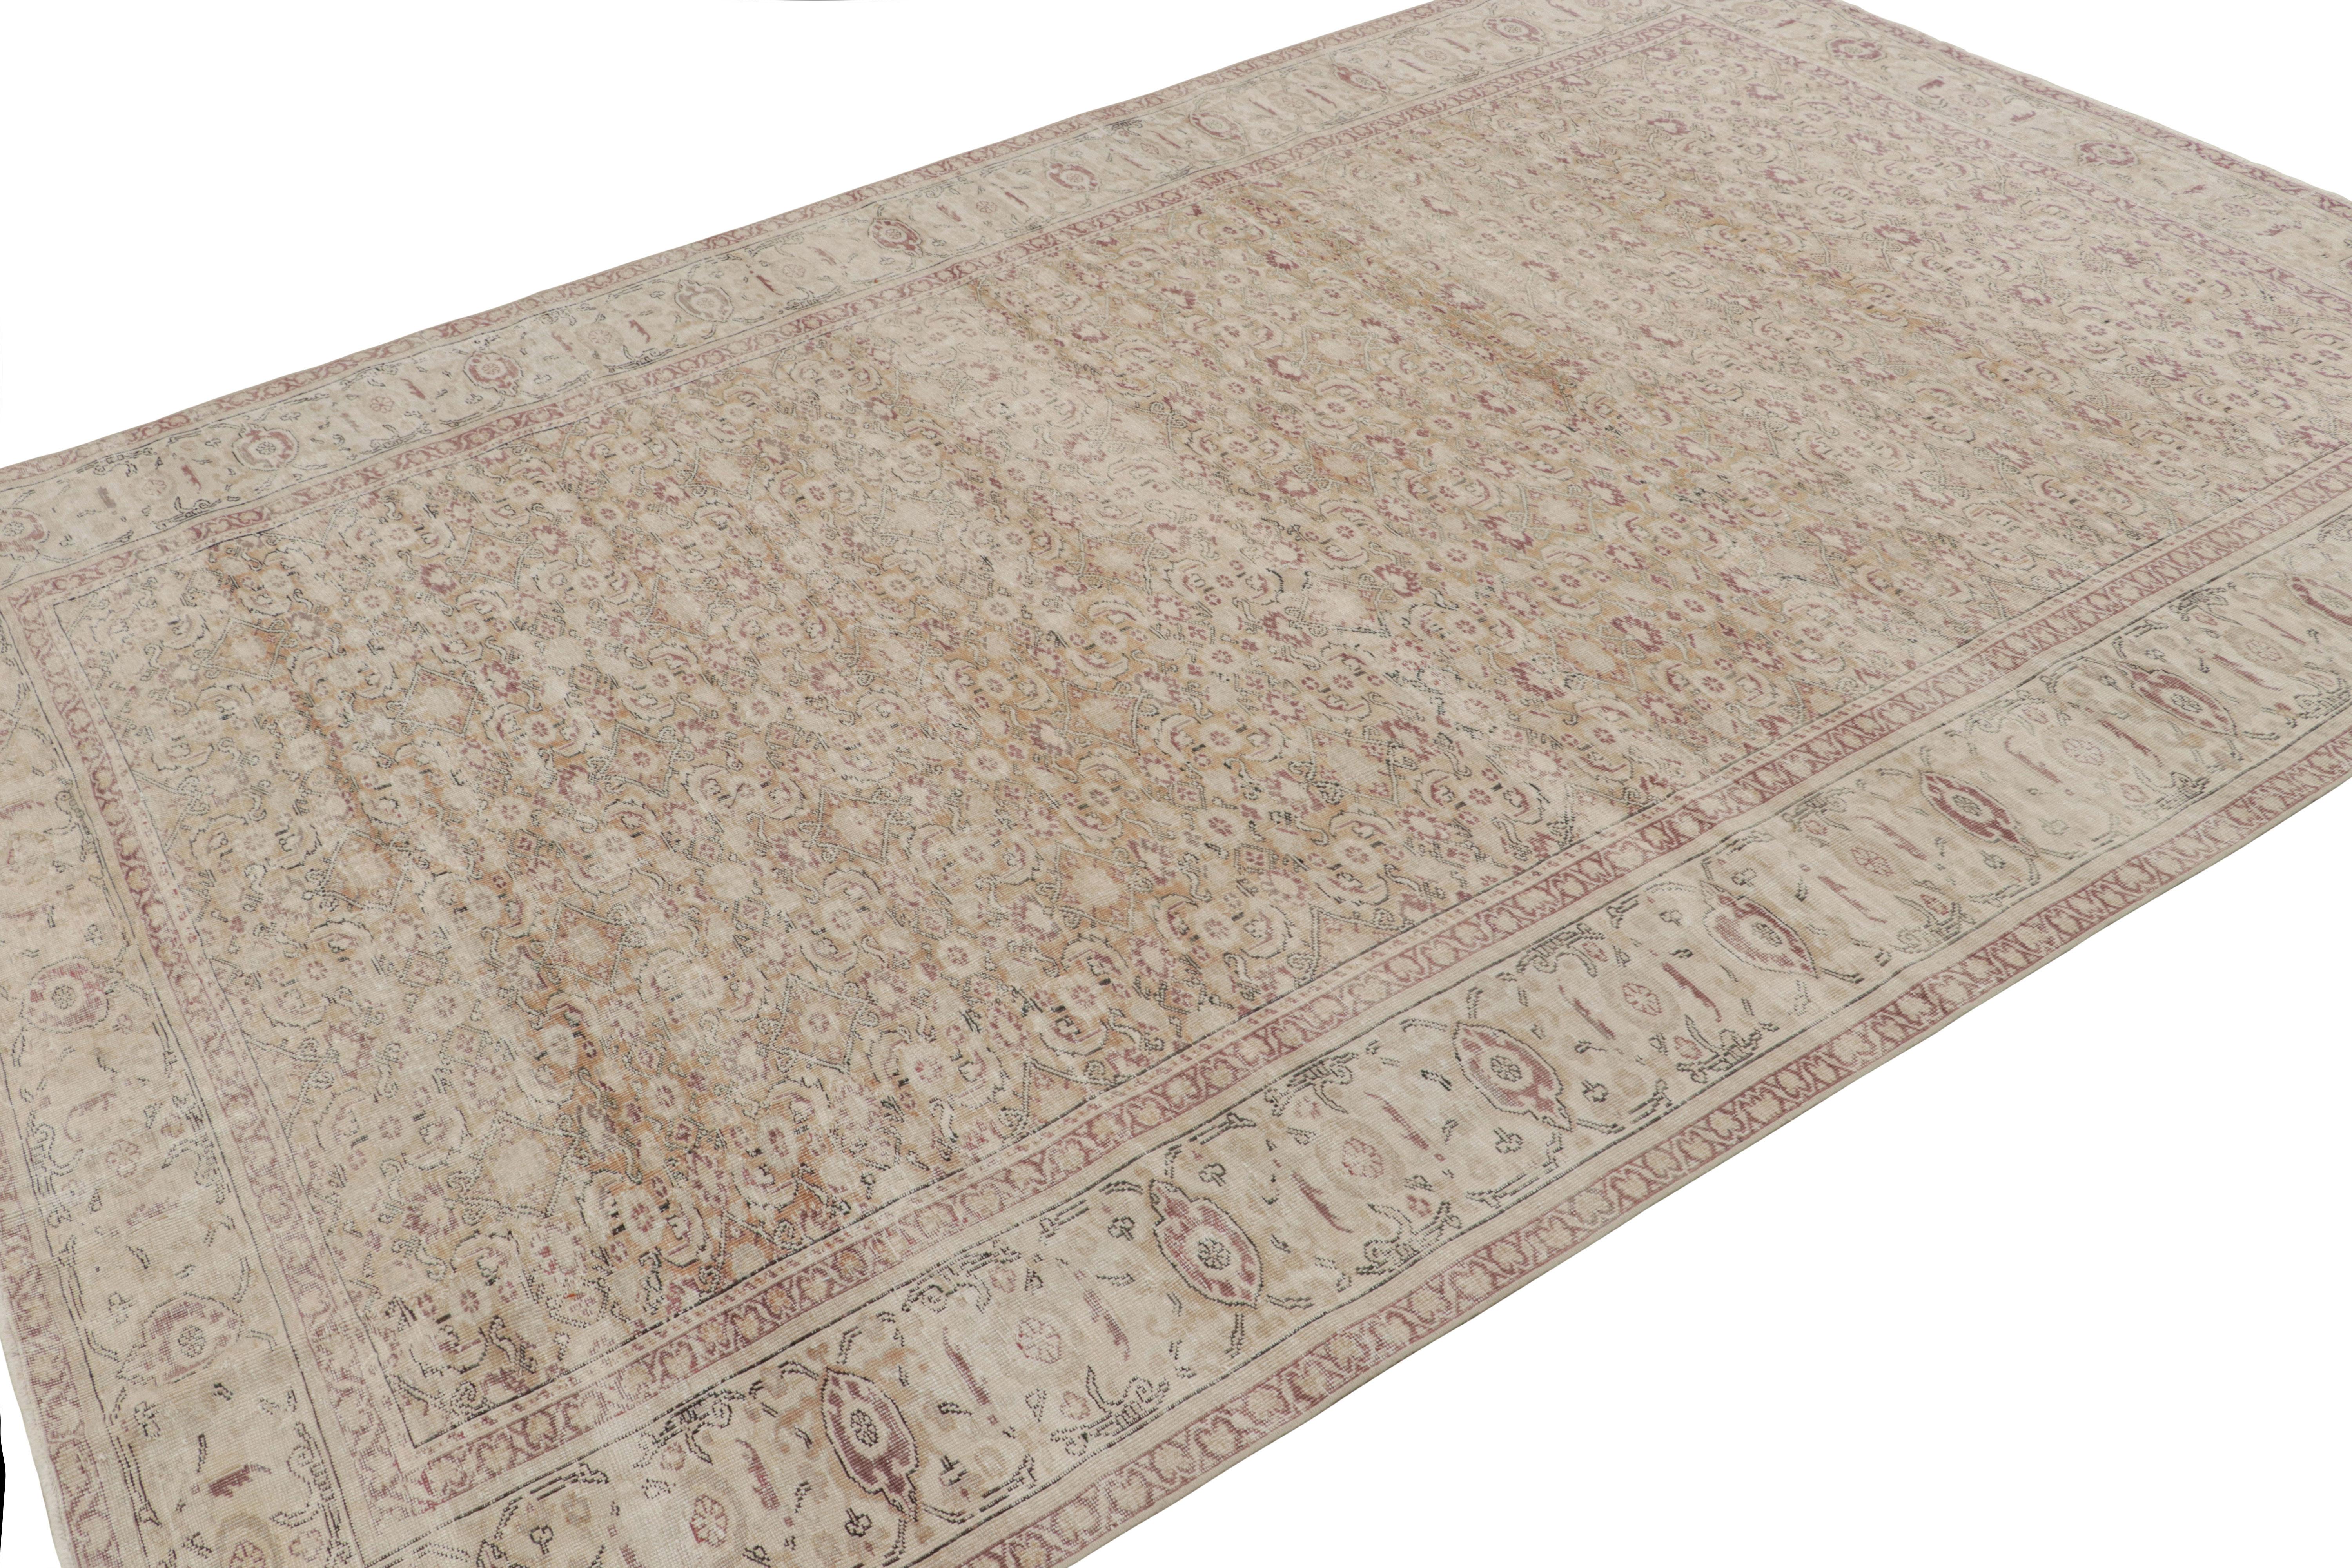 Hand-Knotted Vintage Kayseri Rug in Gold and Beige with Floral Patterns, from Rug & Kilim For Sale